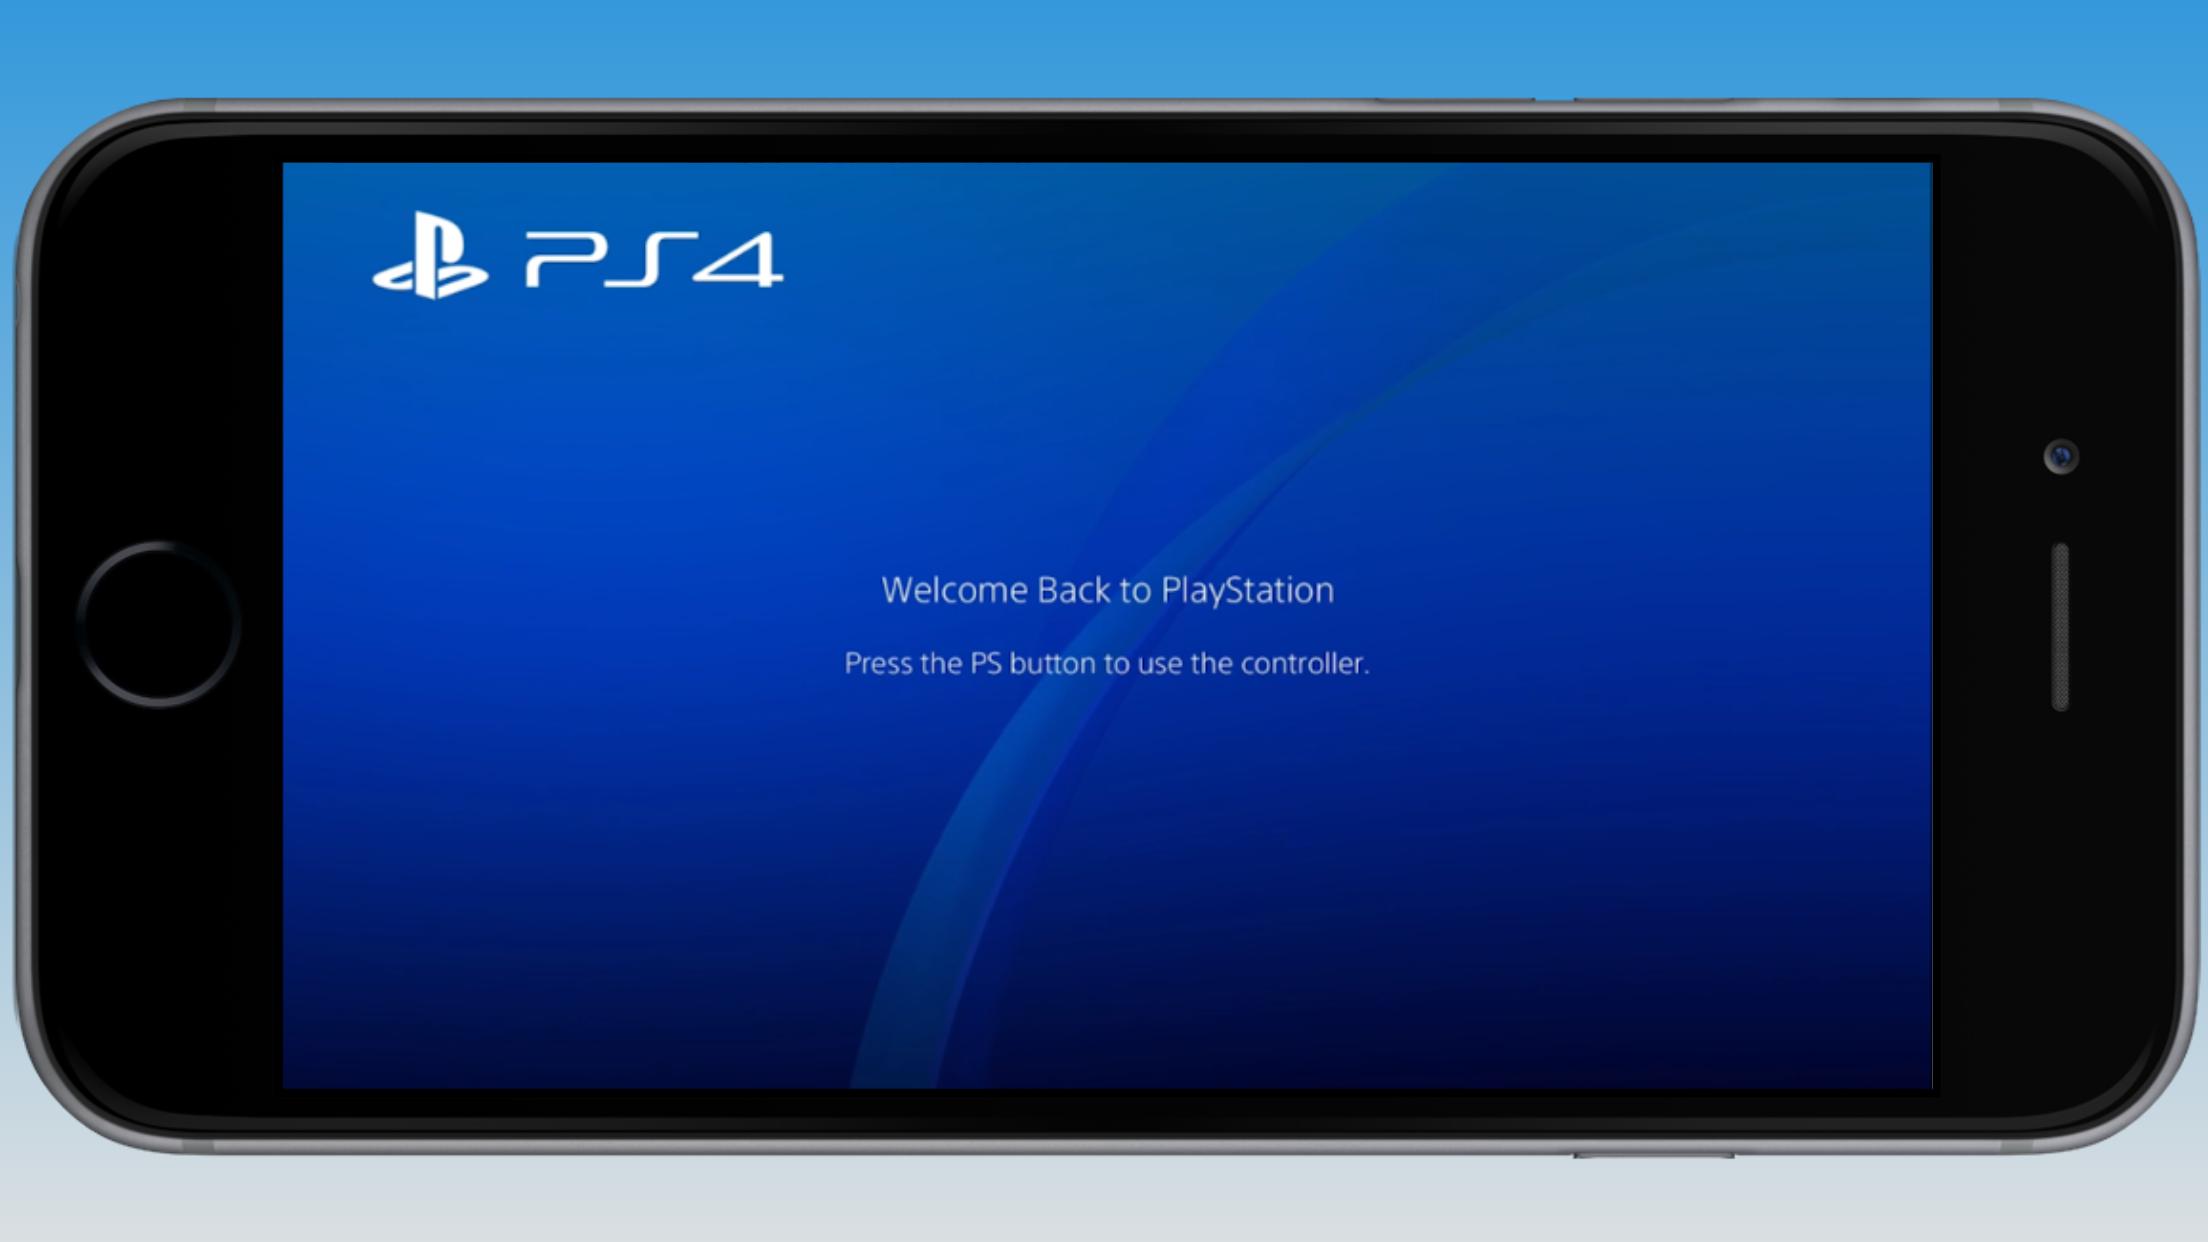 PS4 Simulator Pro 2019. for Android - APK Download